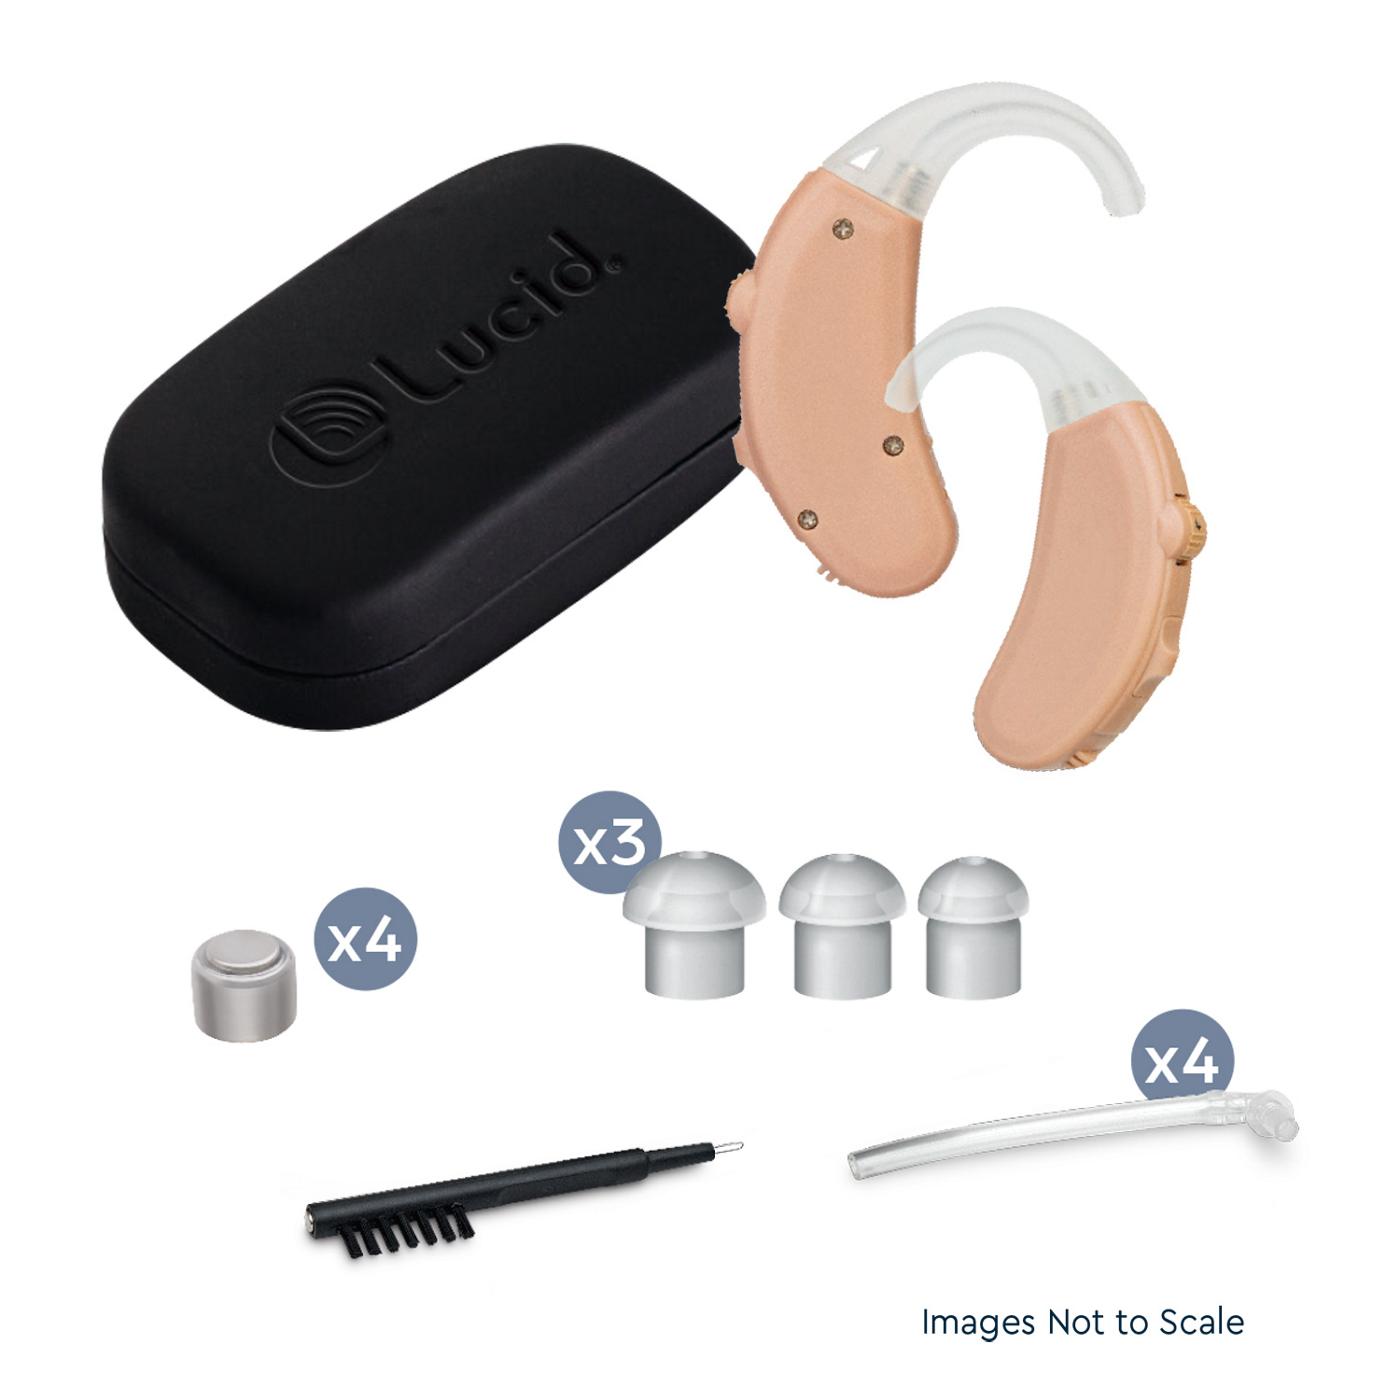 Lucid Audio Behind The Ear Enrich Pro Sound Hearing Aids; image 6 of 6